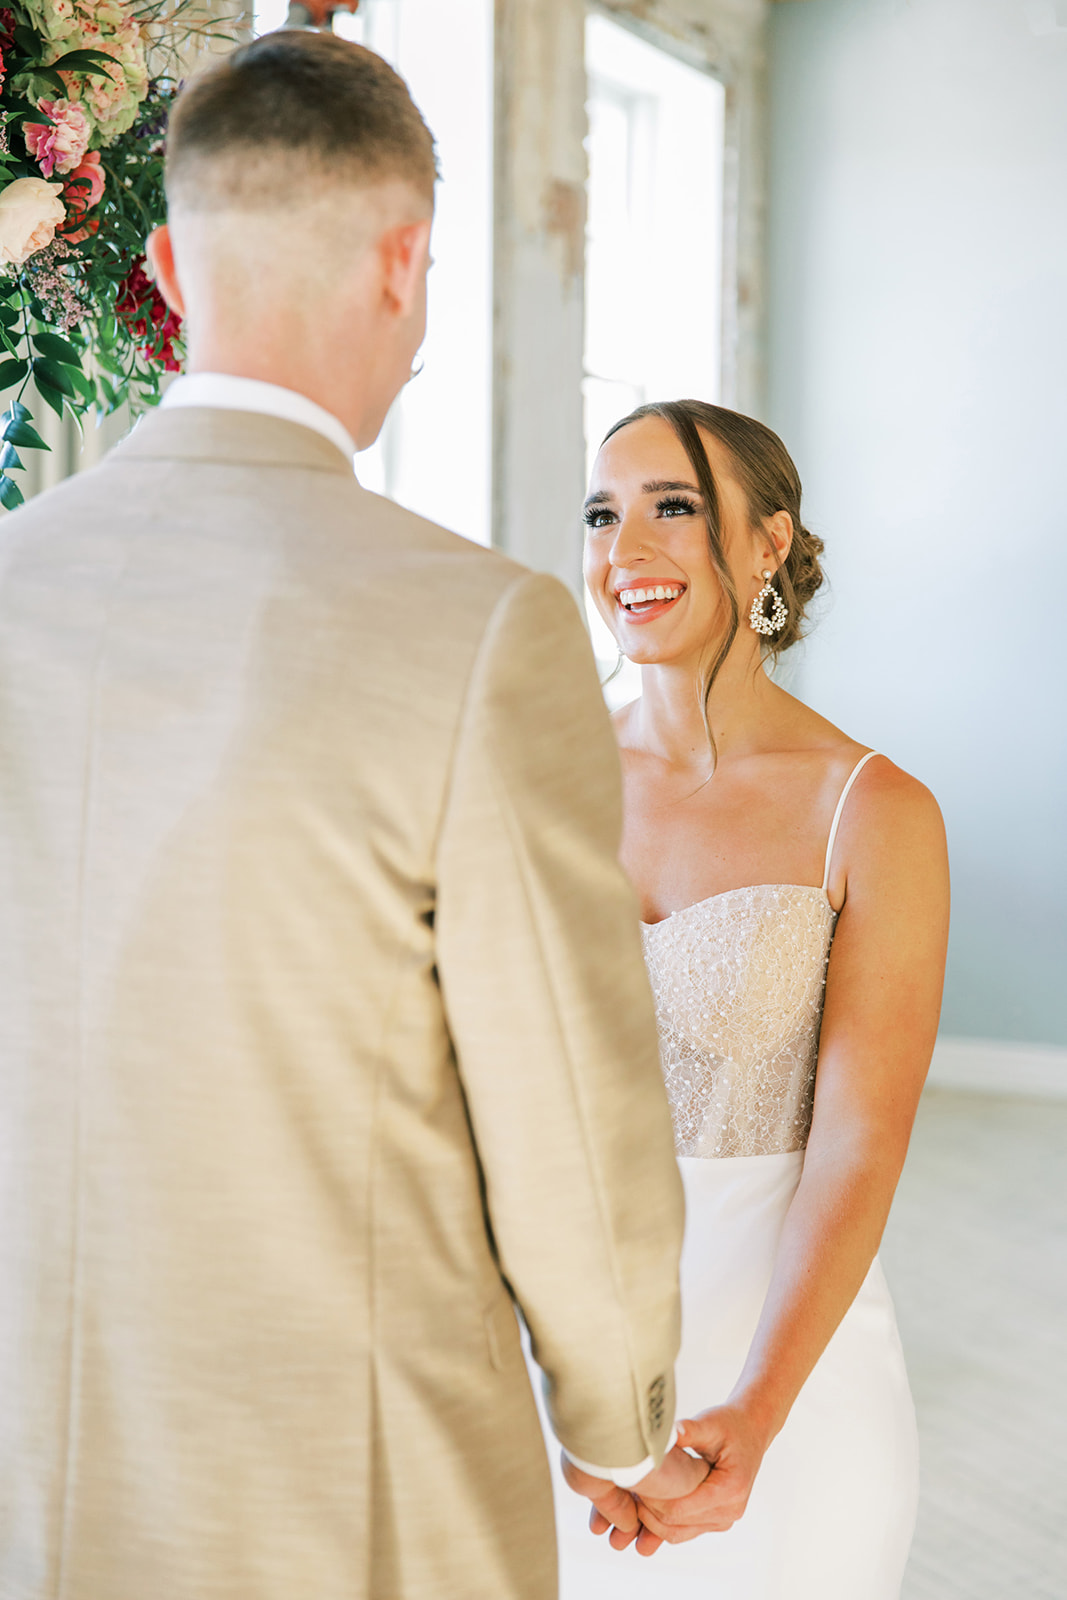 Couple smiling during romantic, vintage inspired wedding ceremony captured by Jenelle Quigley Photography in Regina.